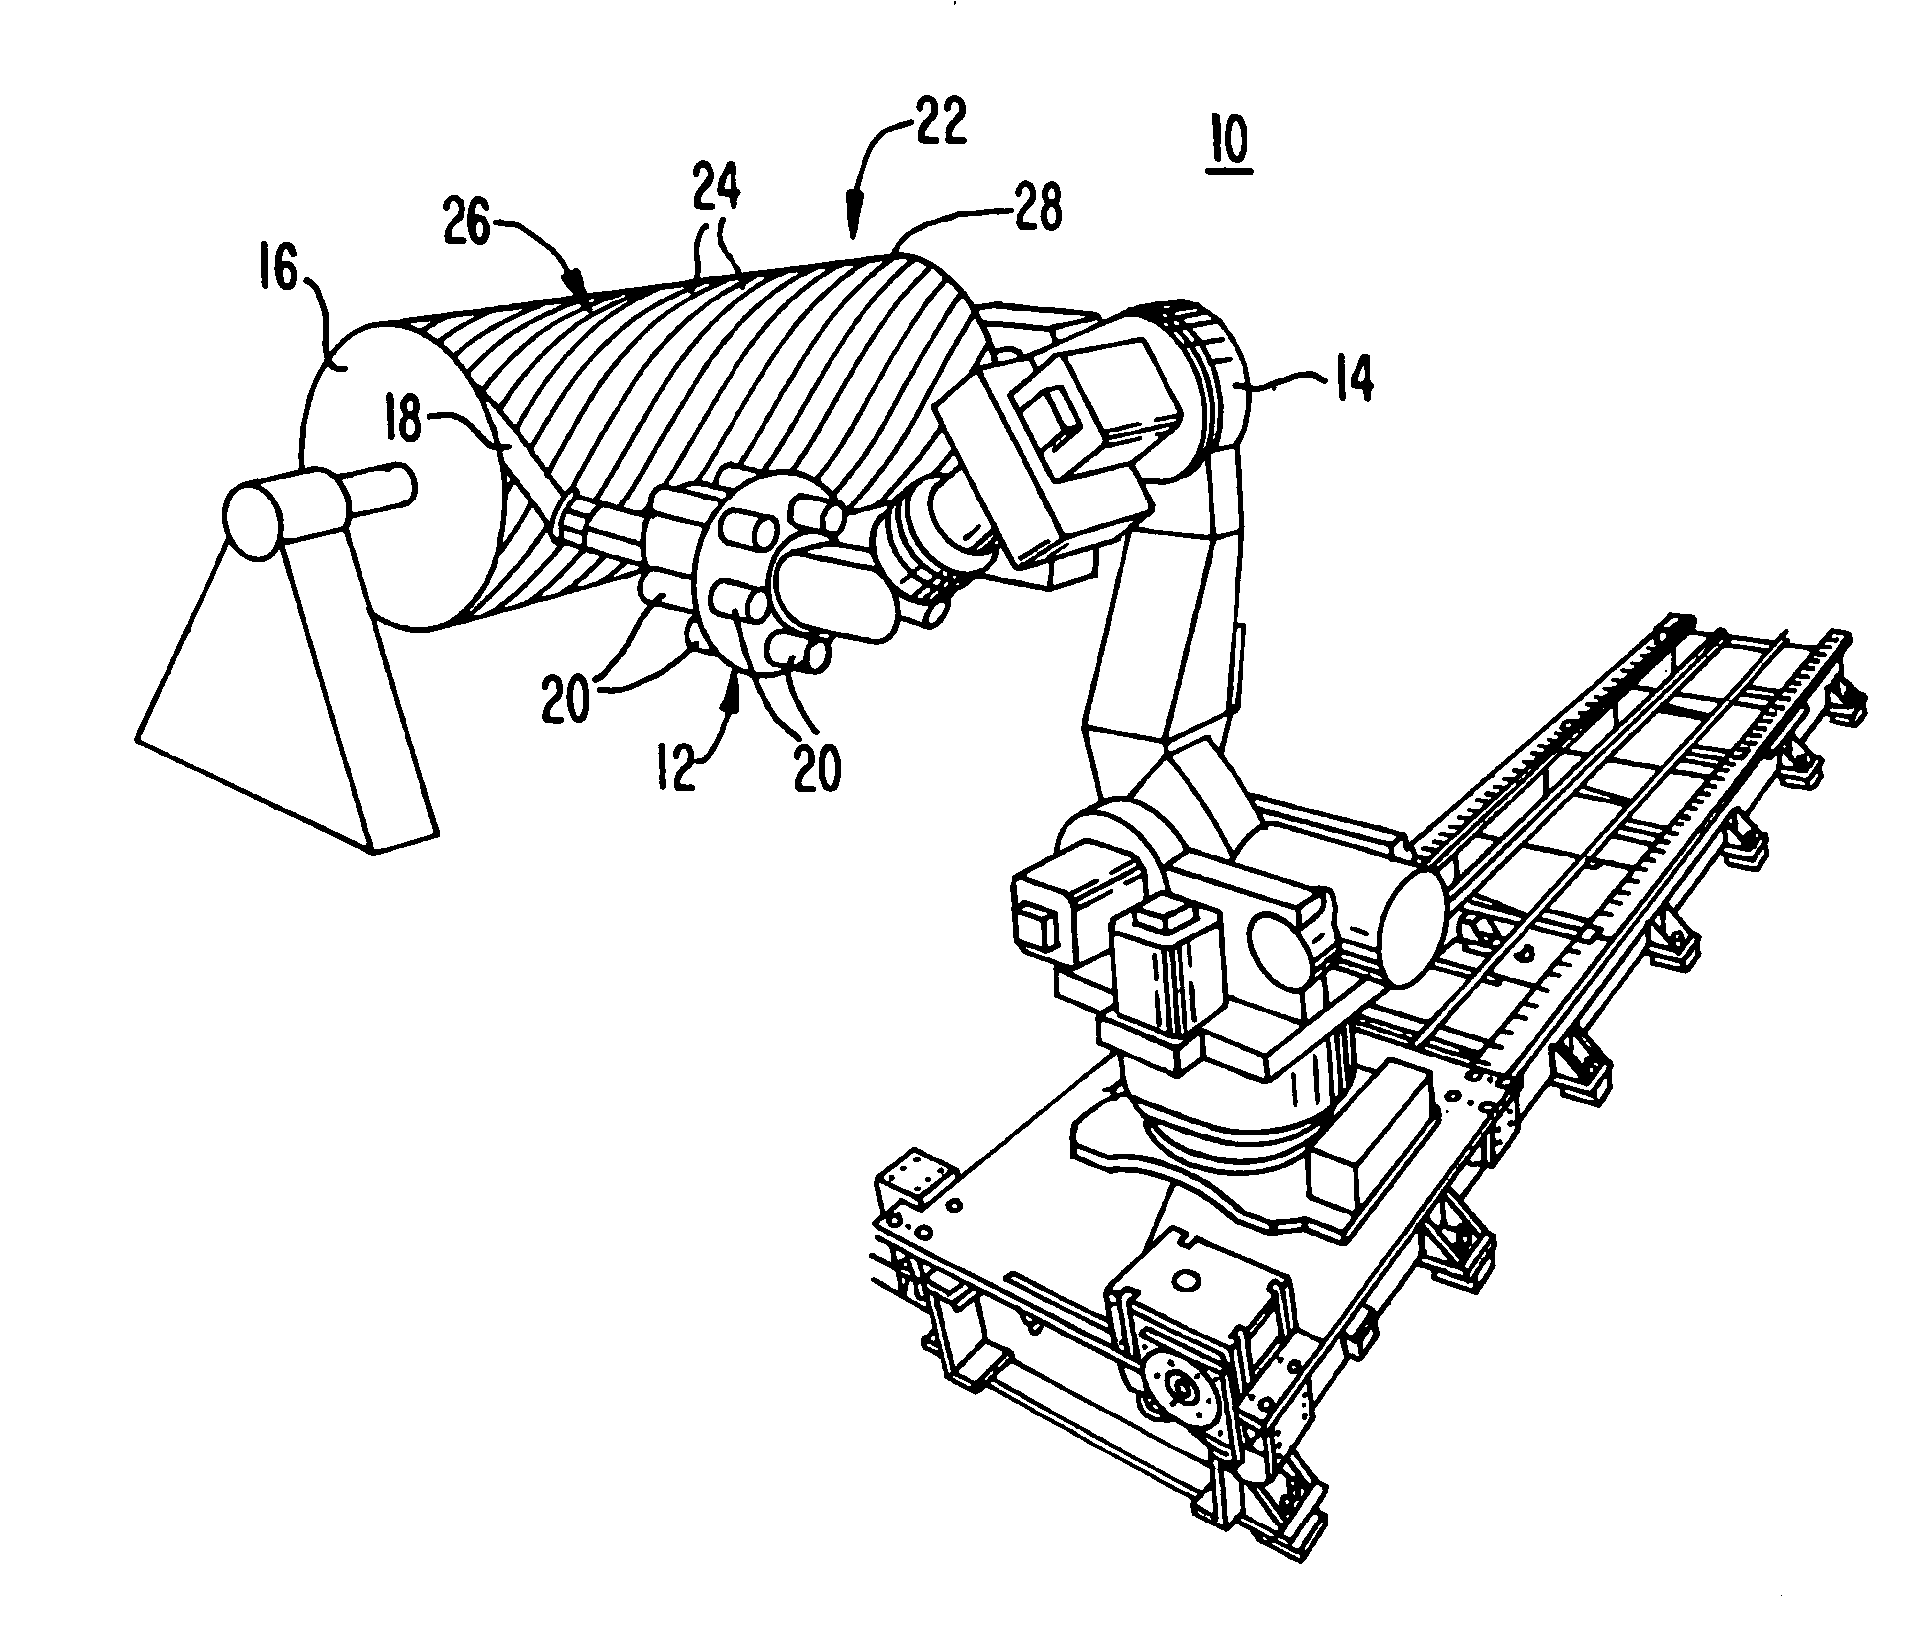 Tow cutting device and system